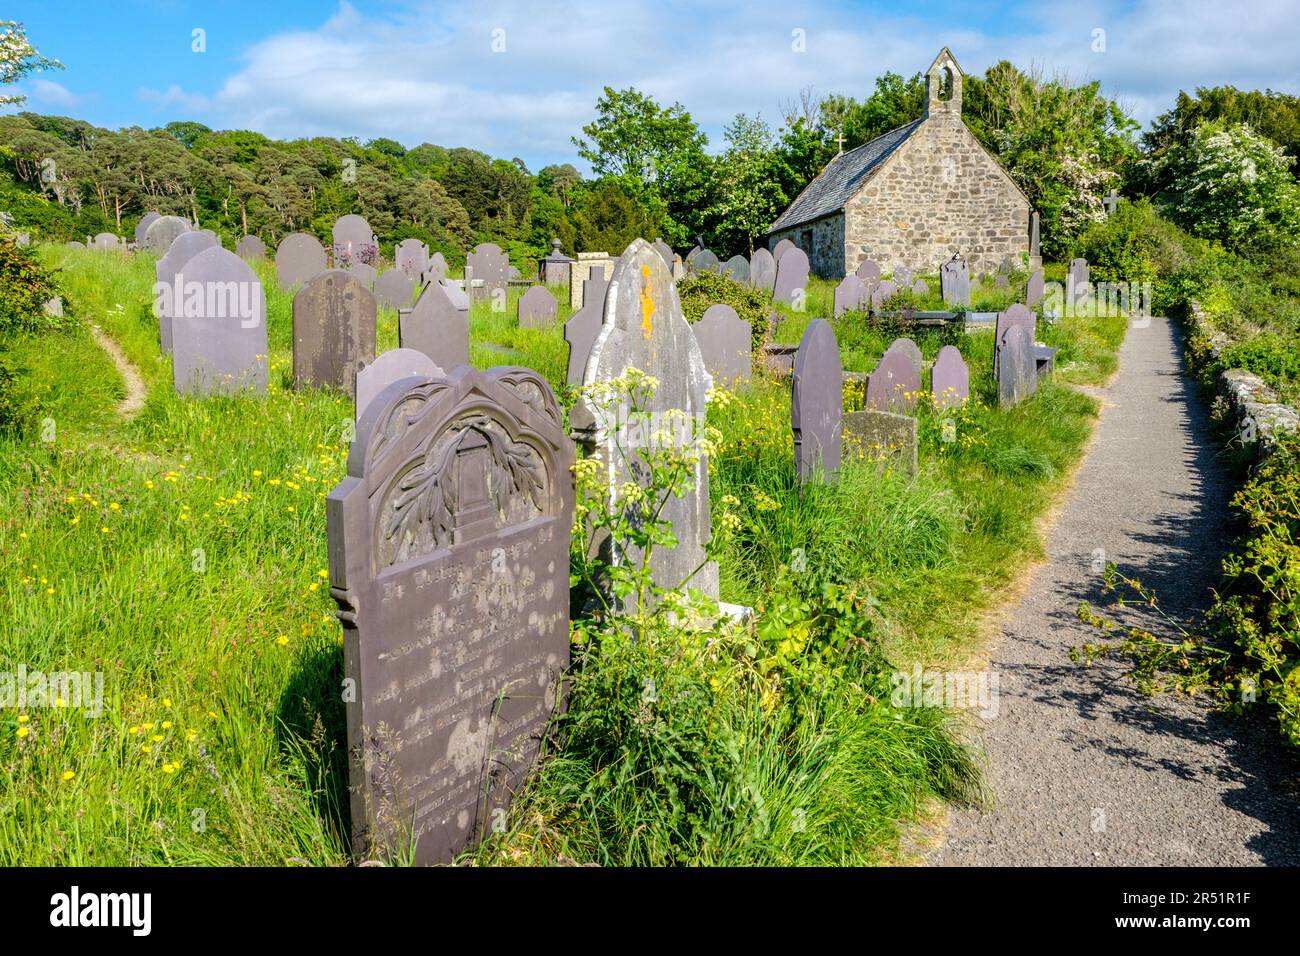 Eglwys Sant Tysilio / St Tysilio's Church on a tidal island in the Menai Straights, Anglesey, Wales Stock Photo